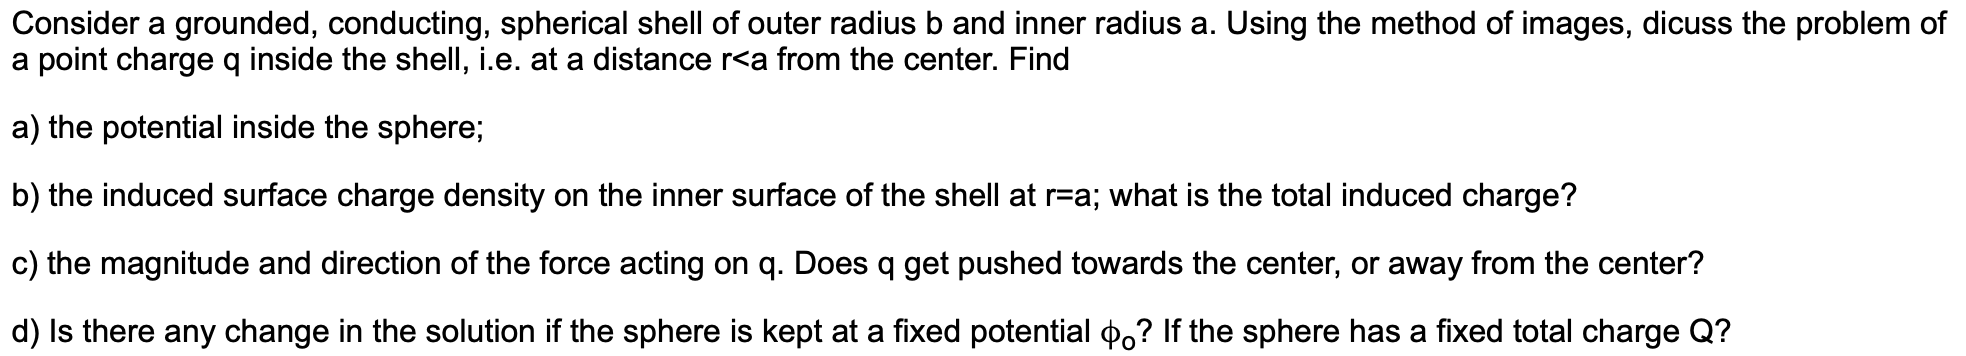 Consider a grounded, conducting, spherical shell of outer radius b and inner radius a. Using the method of images, dicuss the problem of
a point charge q inside the shell, i.e. at a distance r<a from the center. Find
a) the potential inside the sphere;
b) the induced surface charge density on the inner surface of the shell at r-a; what is the total induced charge?
c) the magnitude and direction of the force acting on q. Does q get pushed towards the center, or away from the center?
d) Is there any change in the solution if the sphere is kept at a fixed potential po? If the sphere has a fixed total charge Q?
